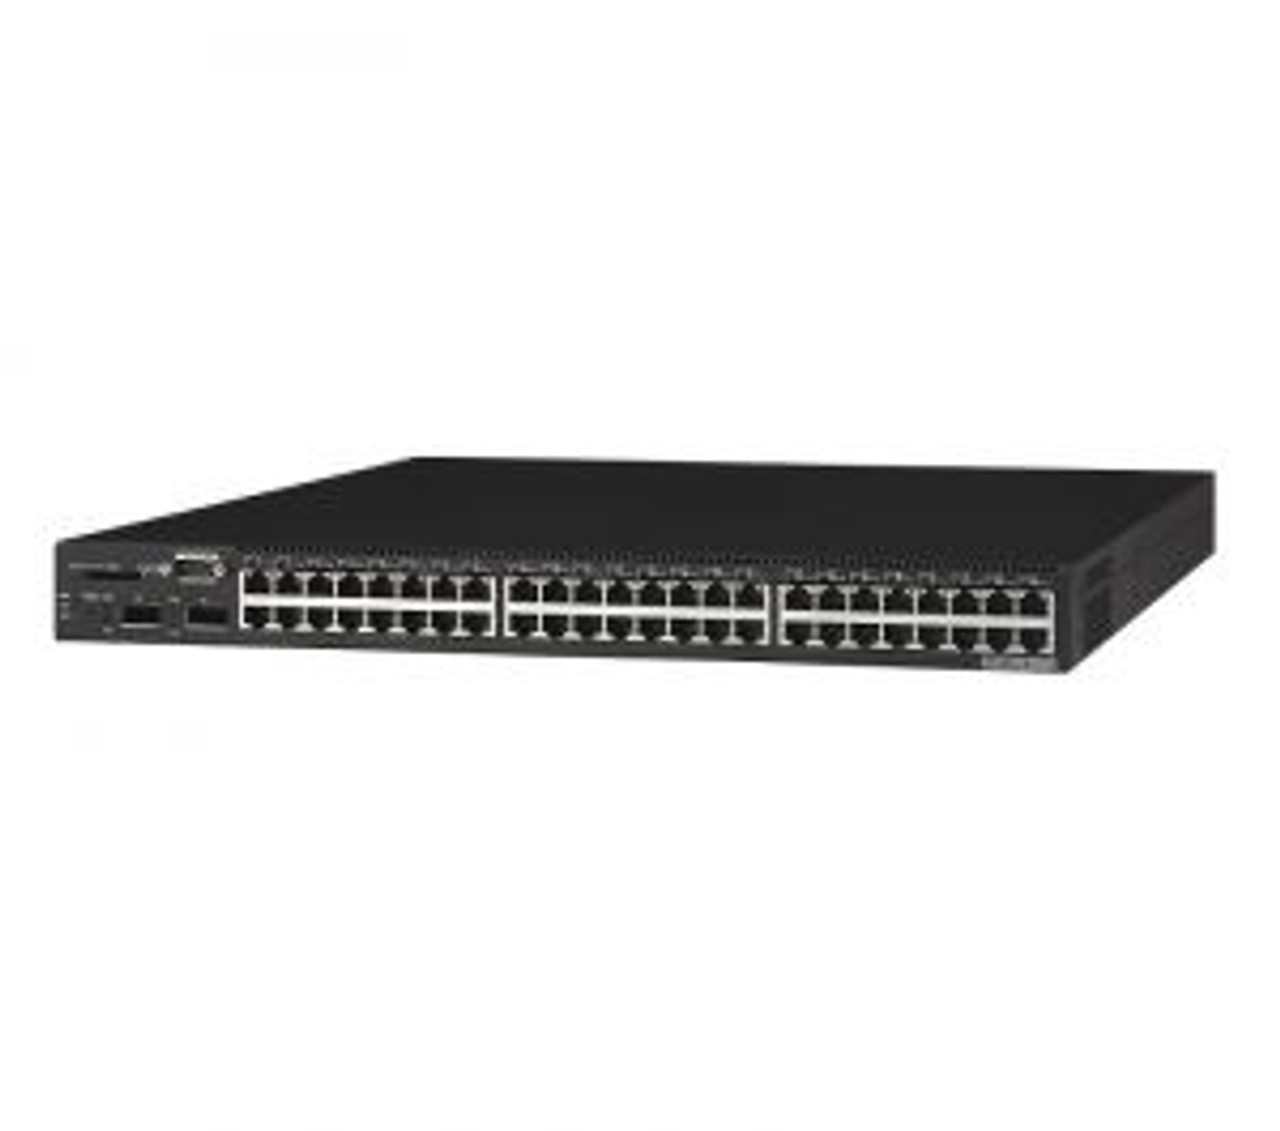 J9584A HP E3800-24SFP-2SFP+ Layer 3 Switch Manageable Stack Port 27 x Expansion Slots